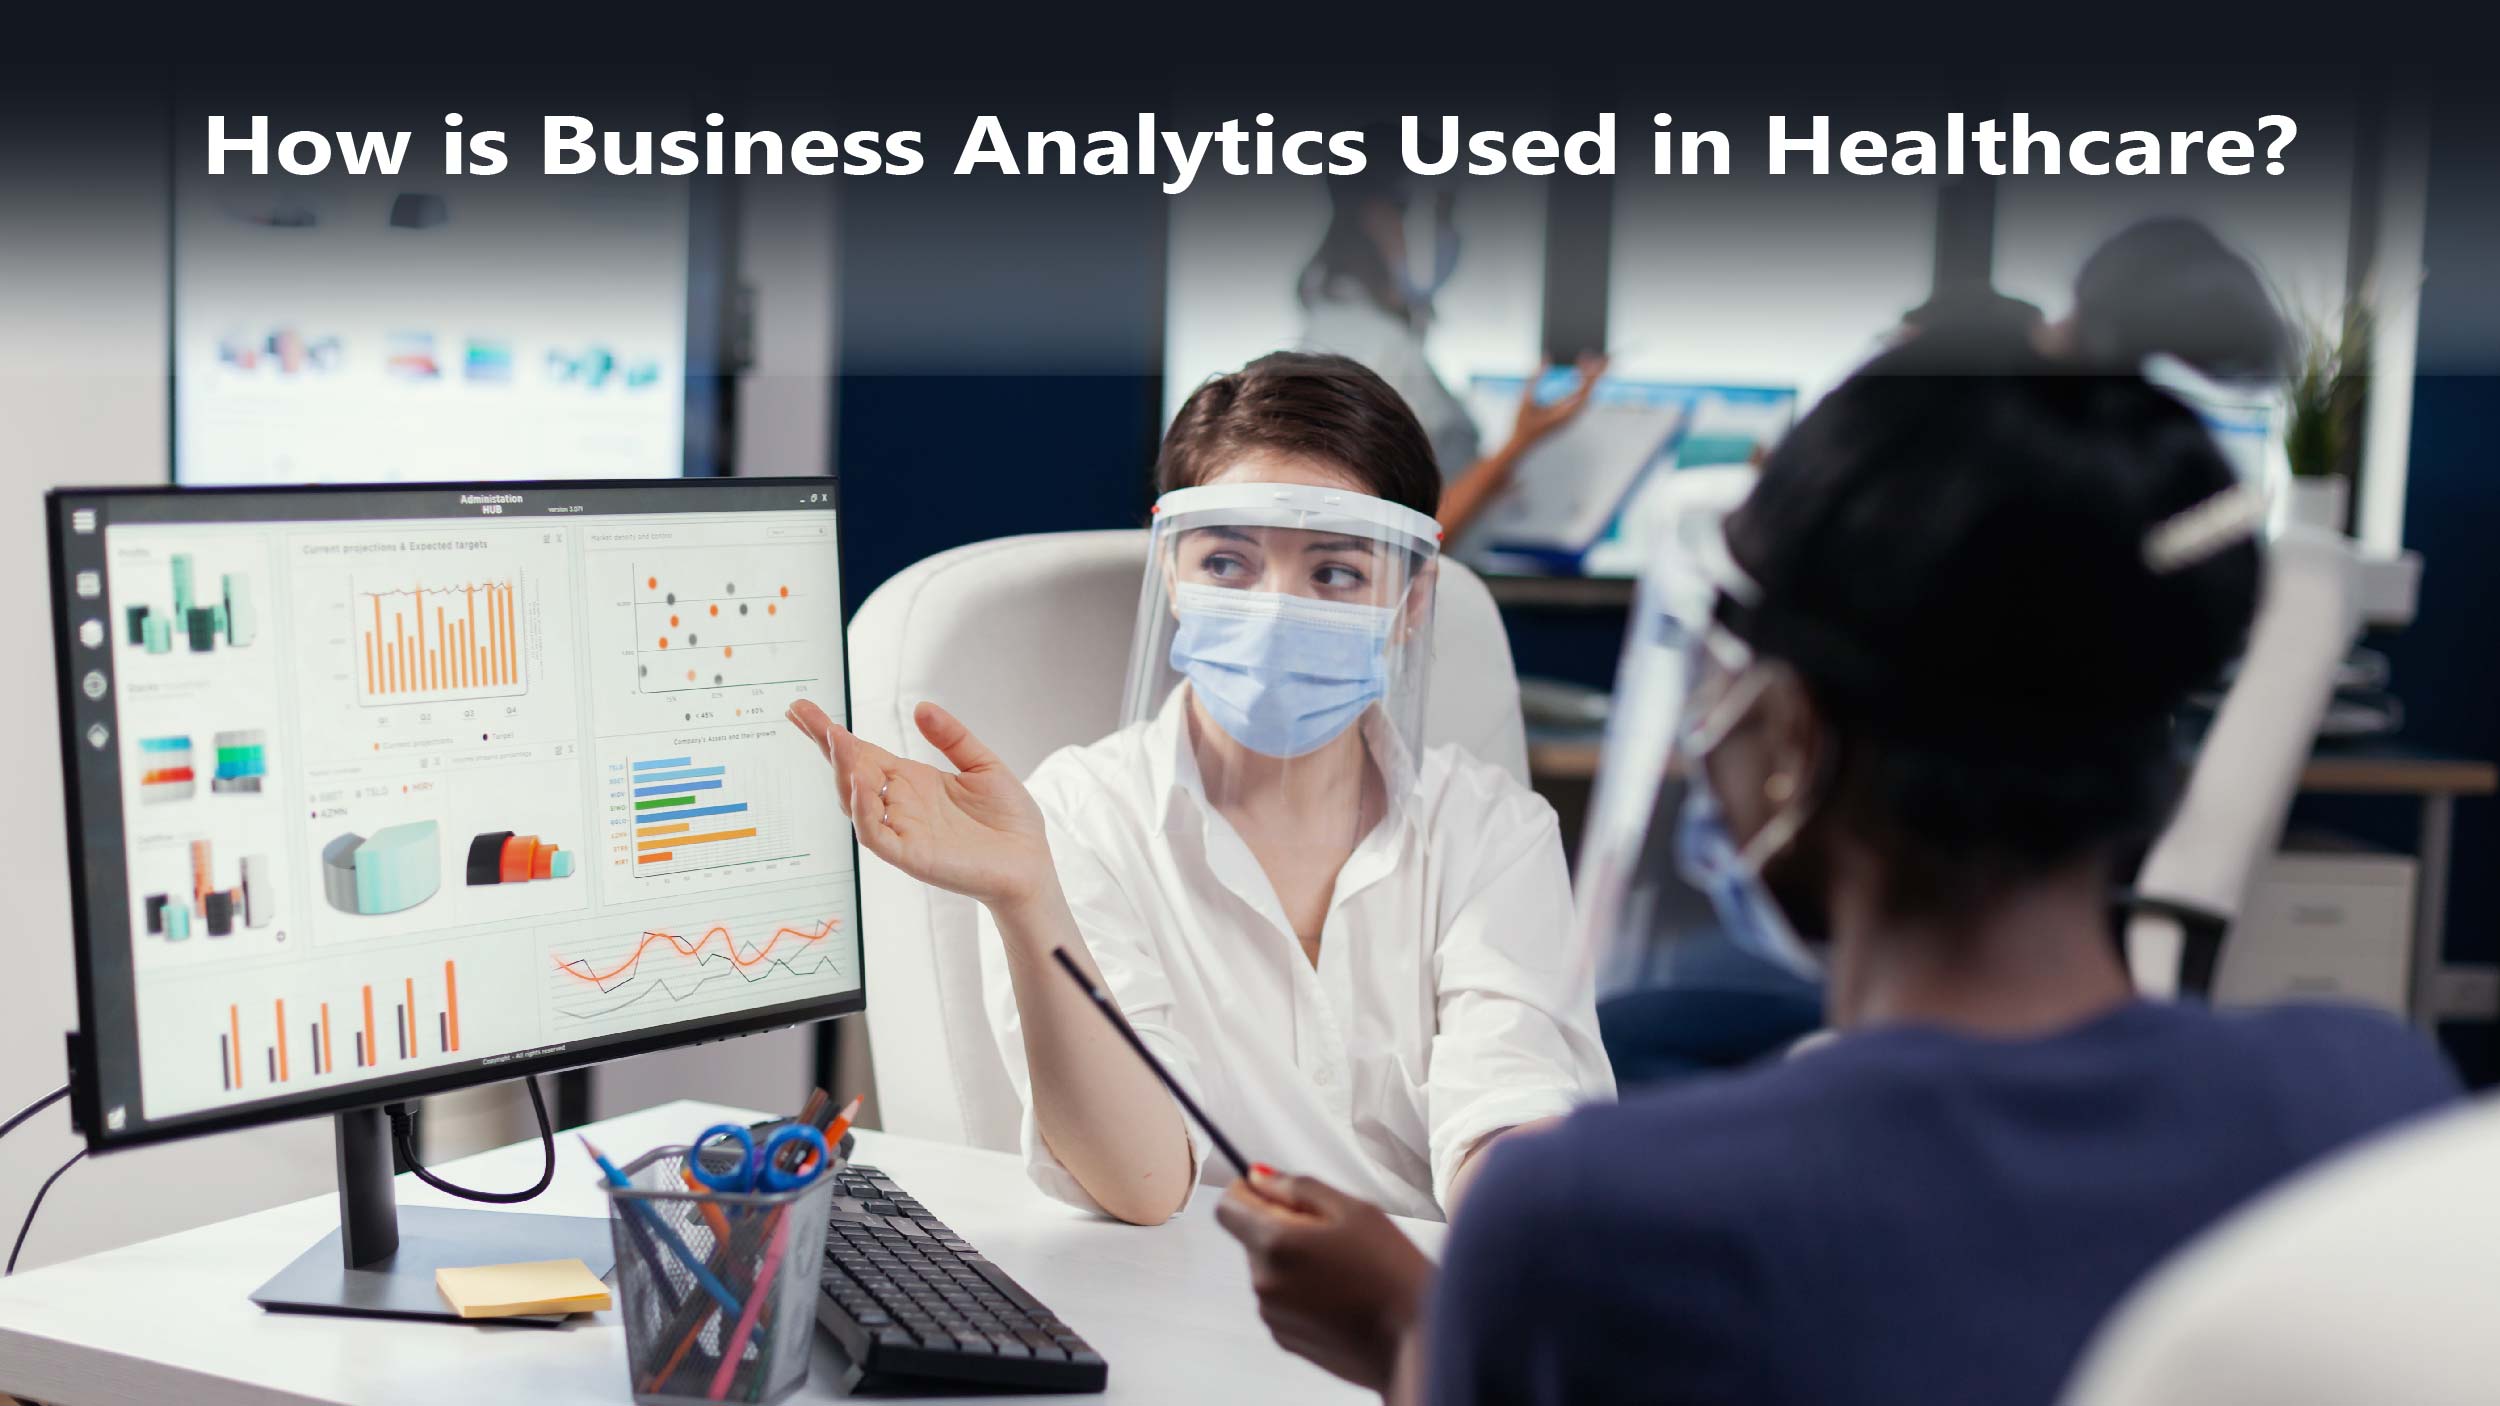 Business Analytics in Healthcare